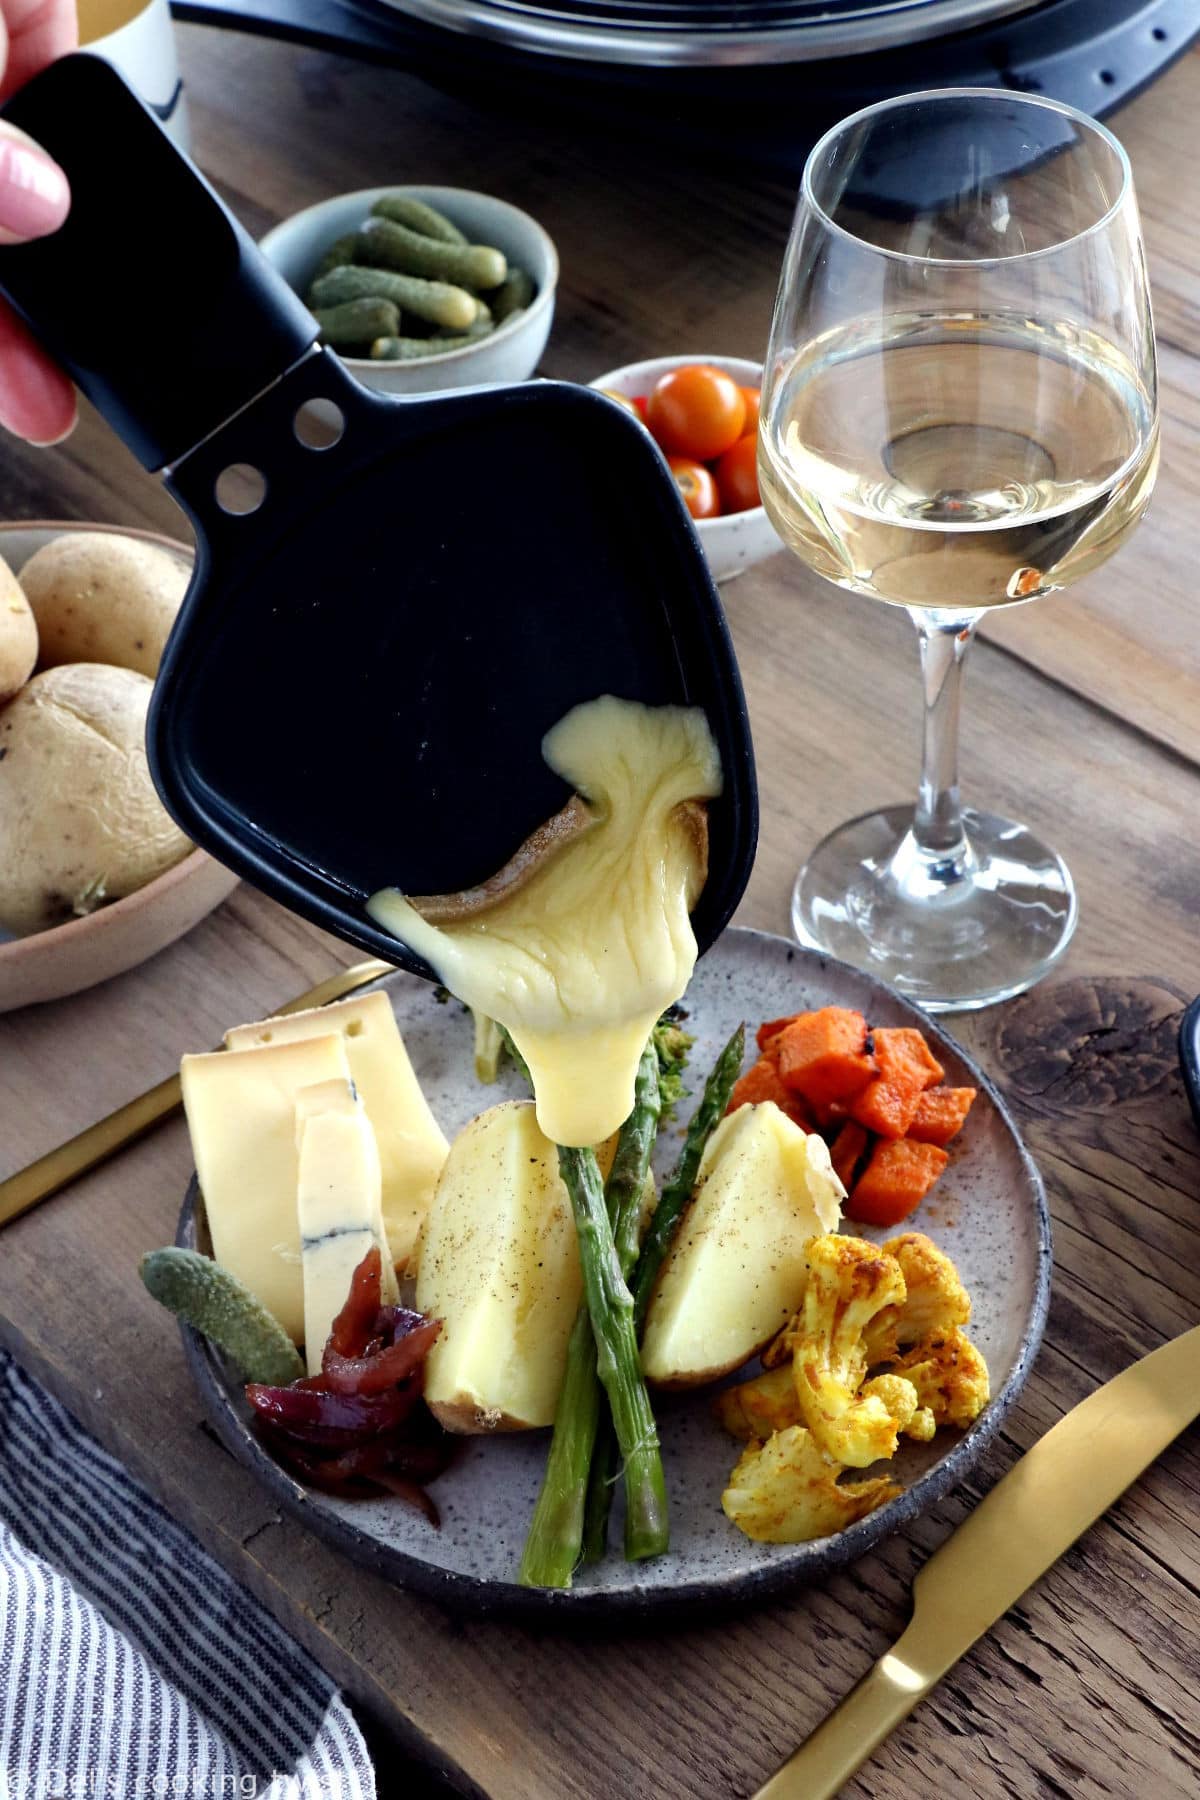 How To Host A Vegetarian Raclette Dinner Party - Del's cooking twist